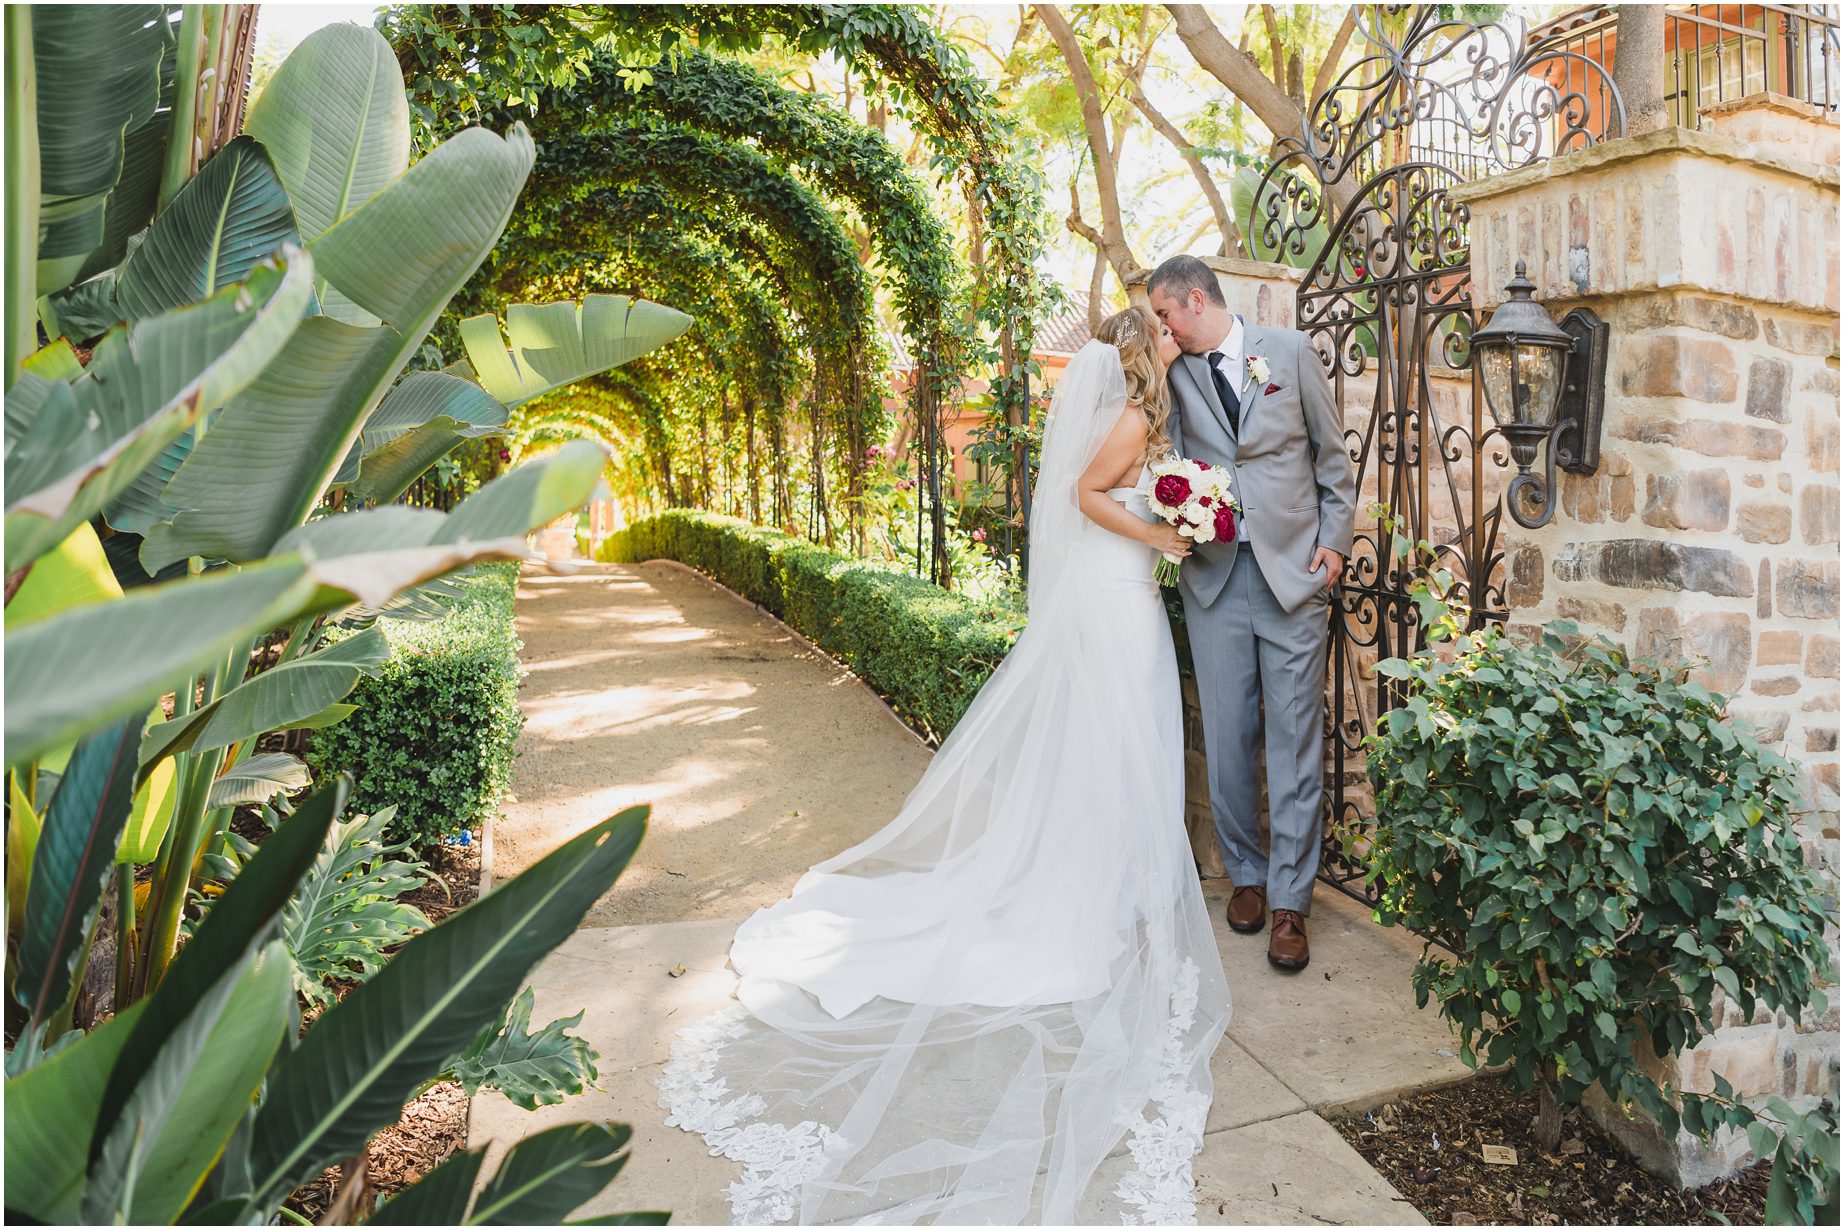 A bride and groom pose for couples portraits at Westlake village in, surrounded by tropical plants and a pillar